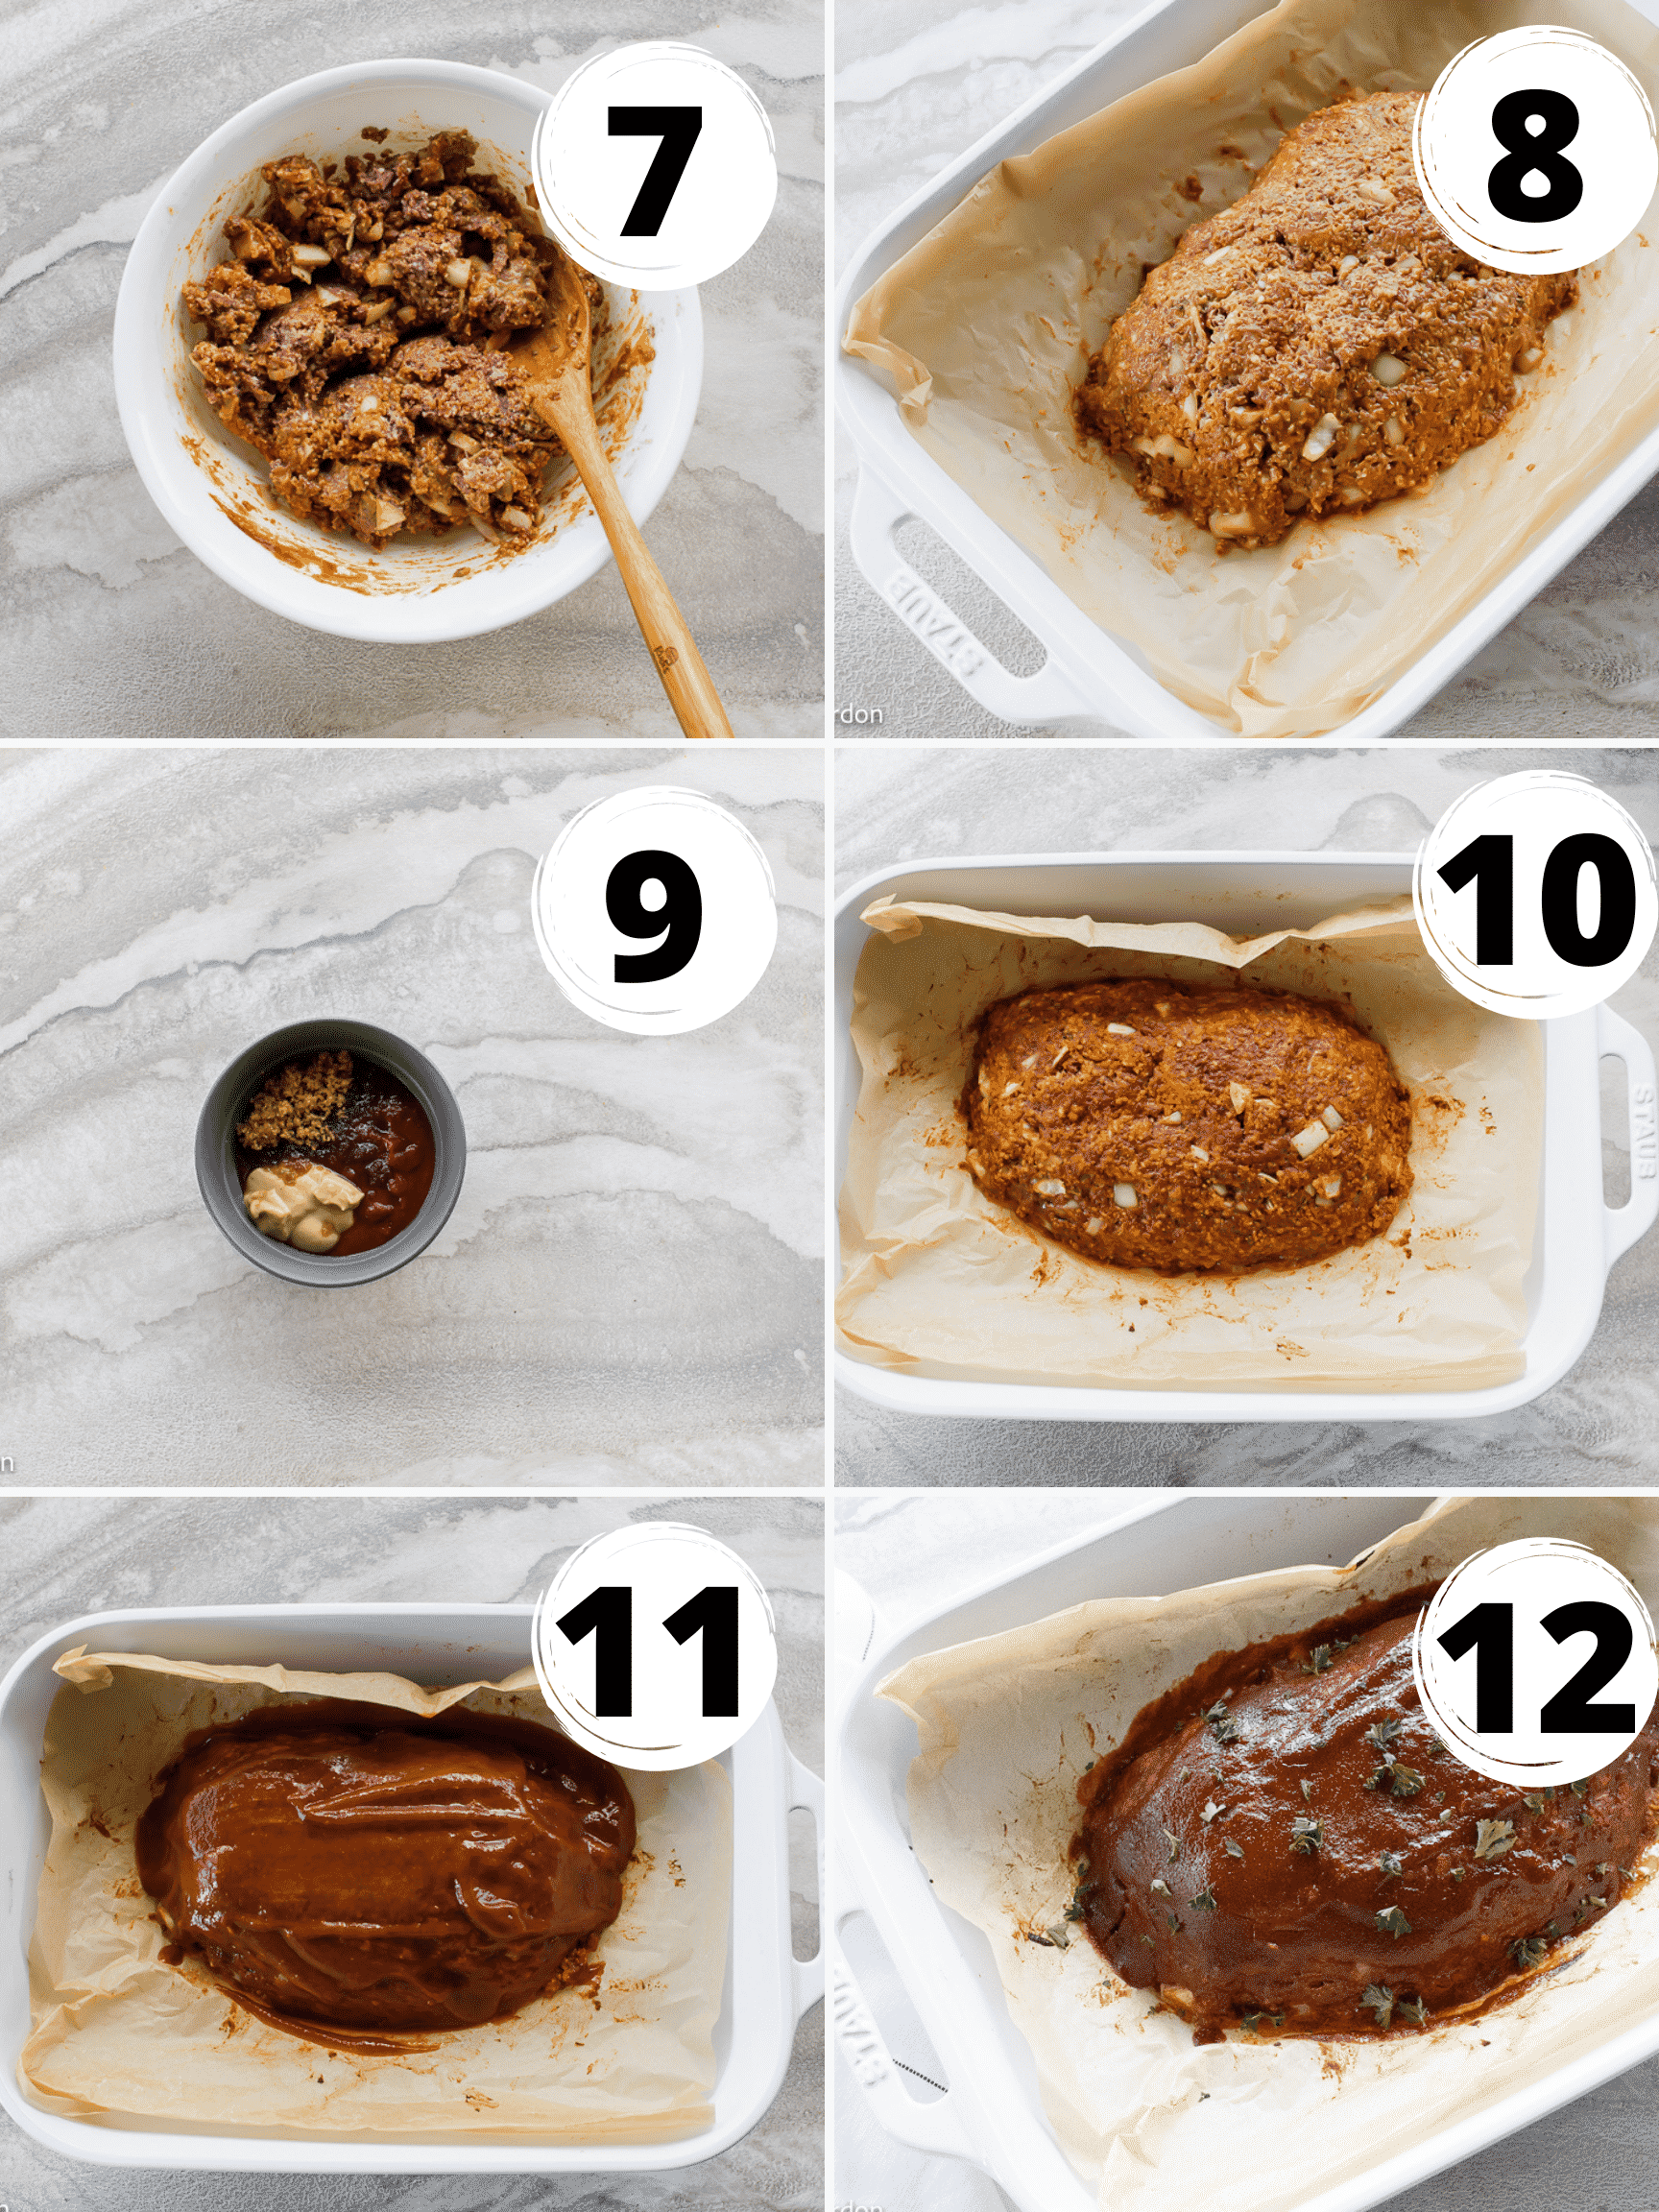 Collage of steps to form and bake a vegan meatloaf